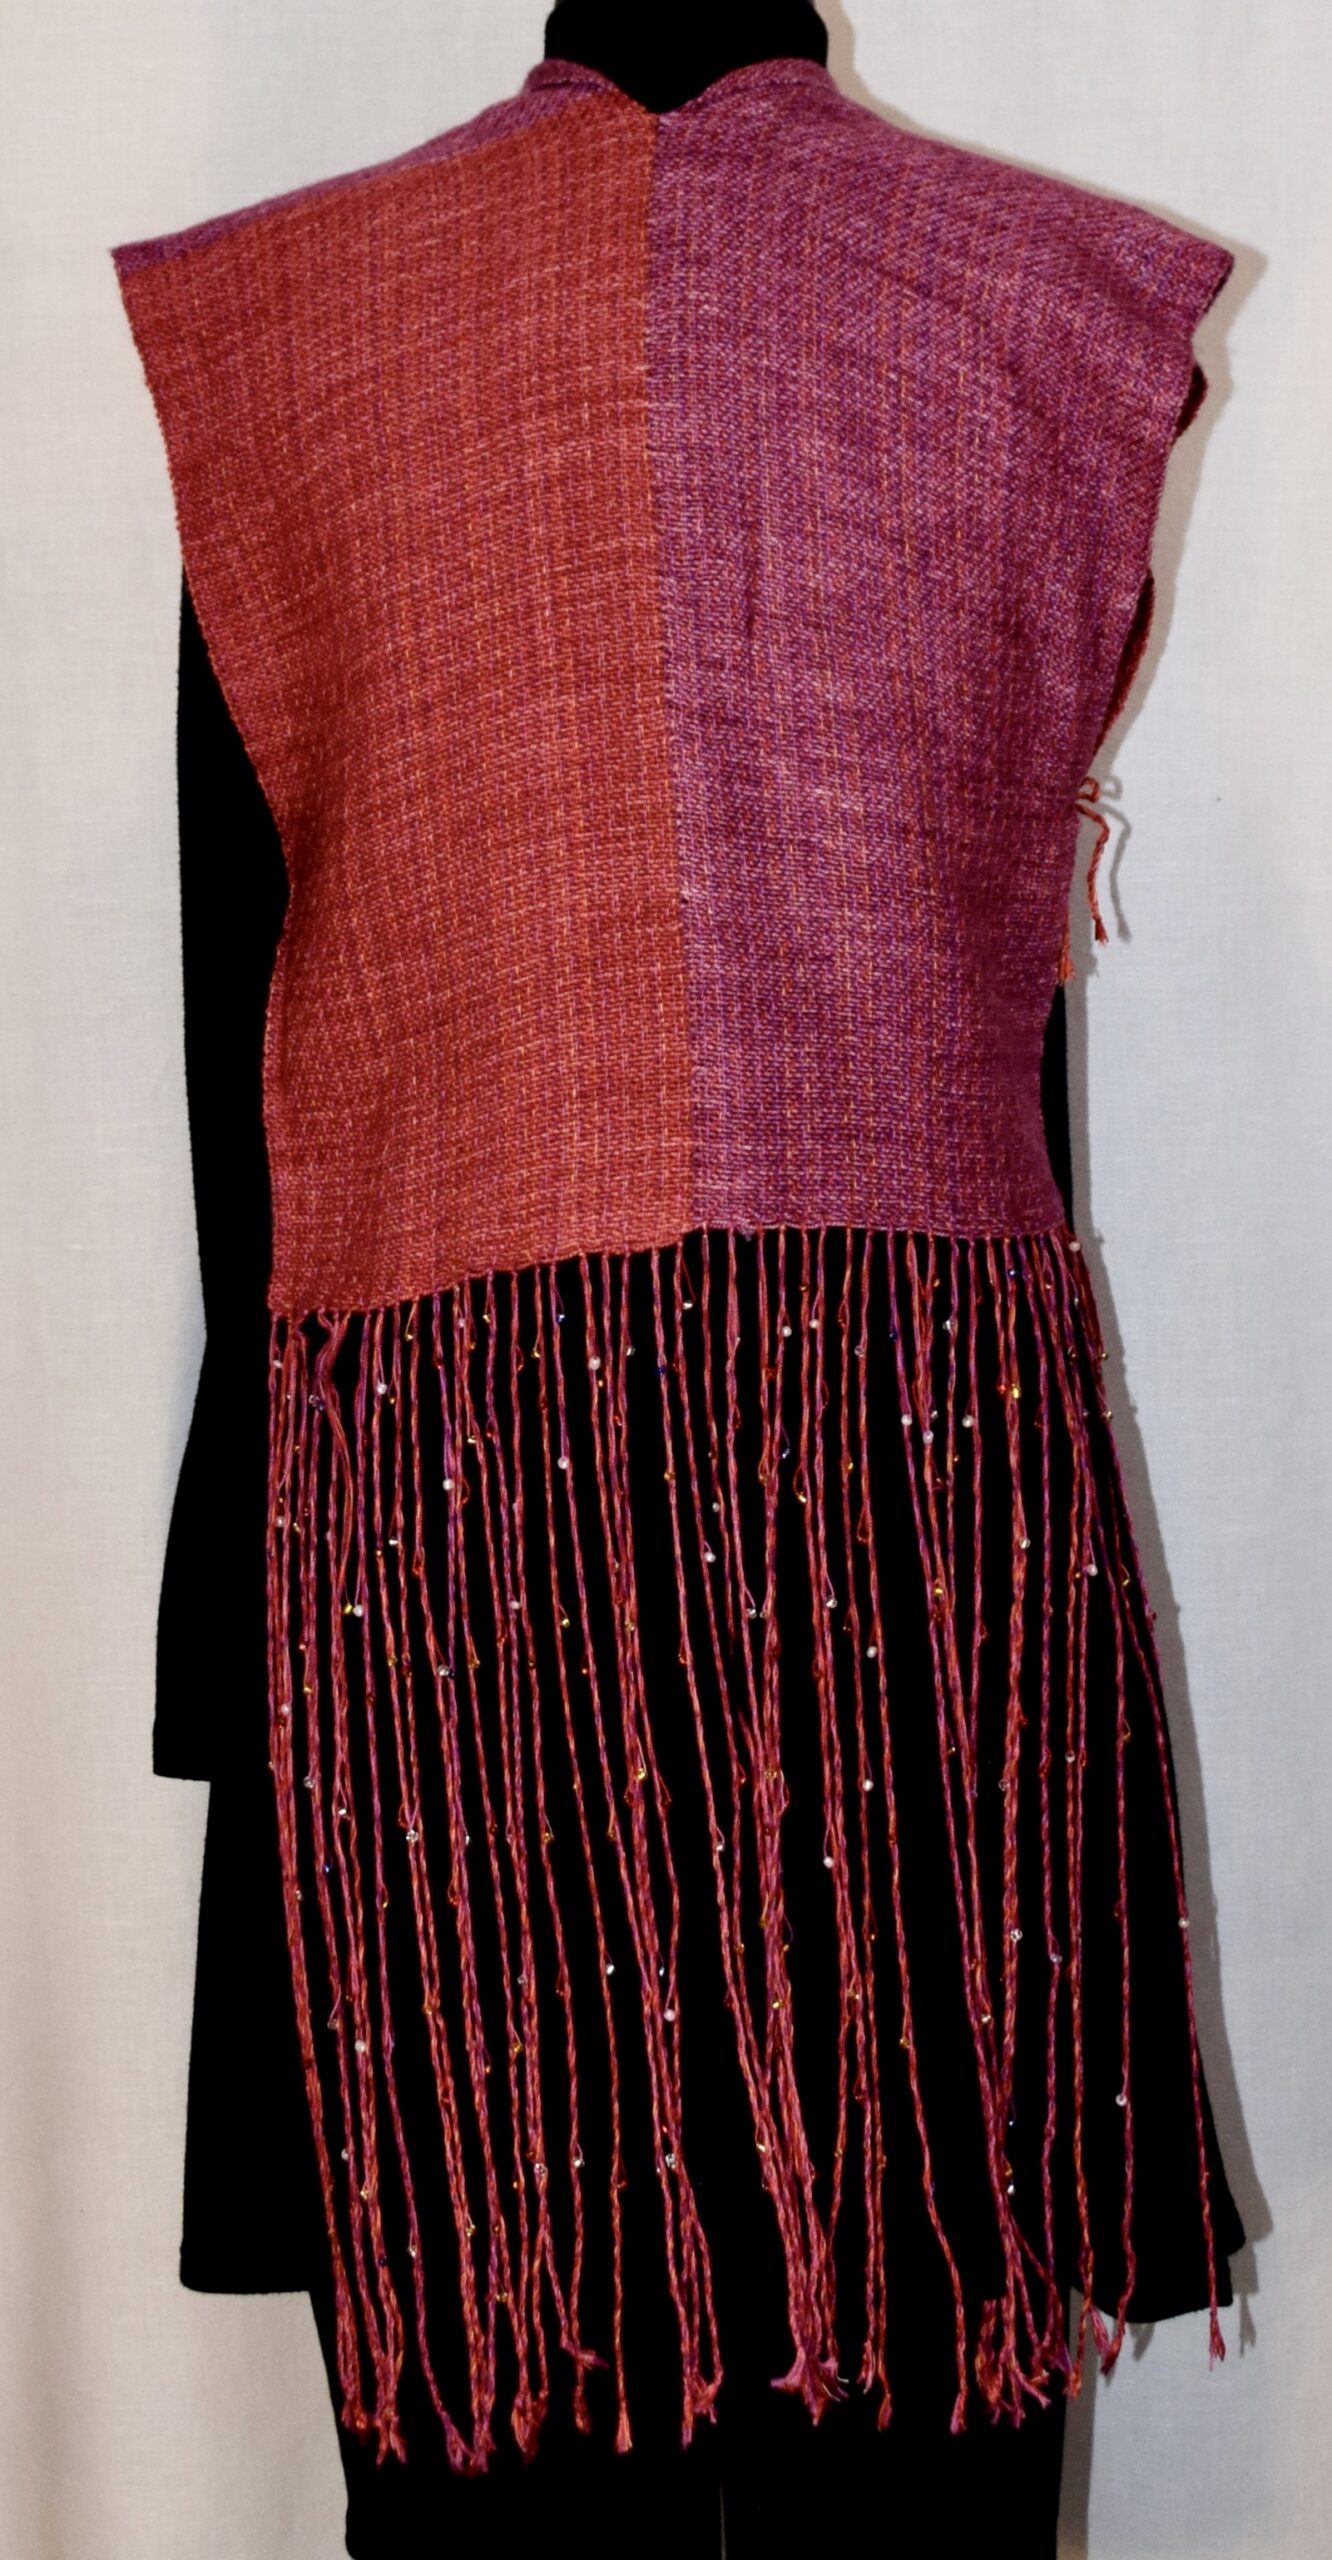 Silk and Cotton Beaded Red and Pink Fringe Vest - FOR SALE $250